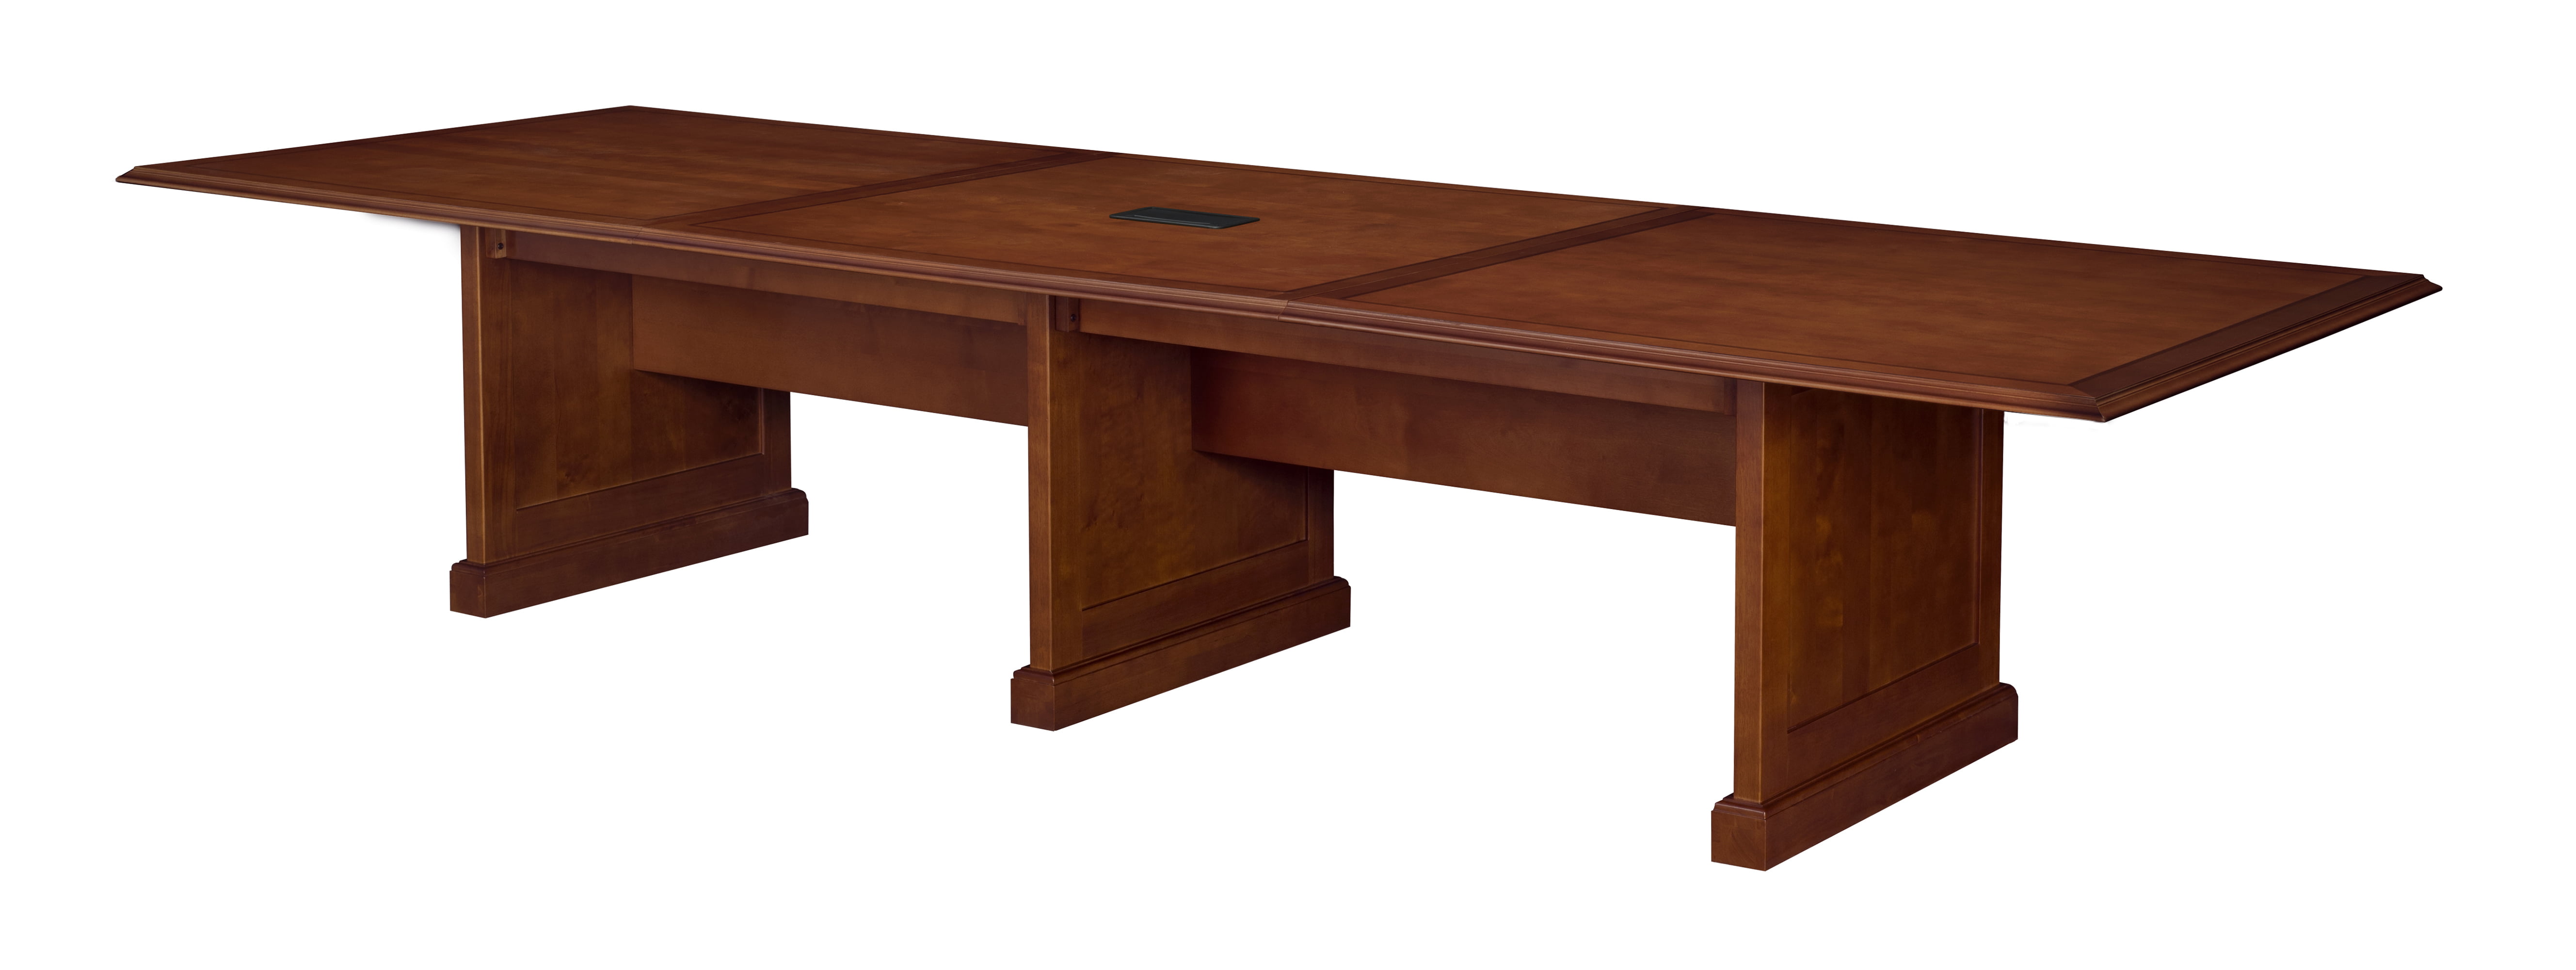 Regency Prestige 144-Inch Modular Conference Table with Power Data Grommets Mahogany 